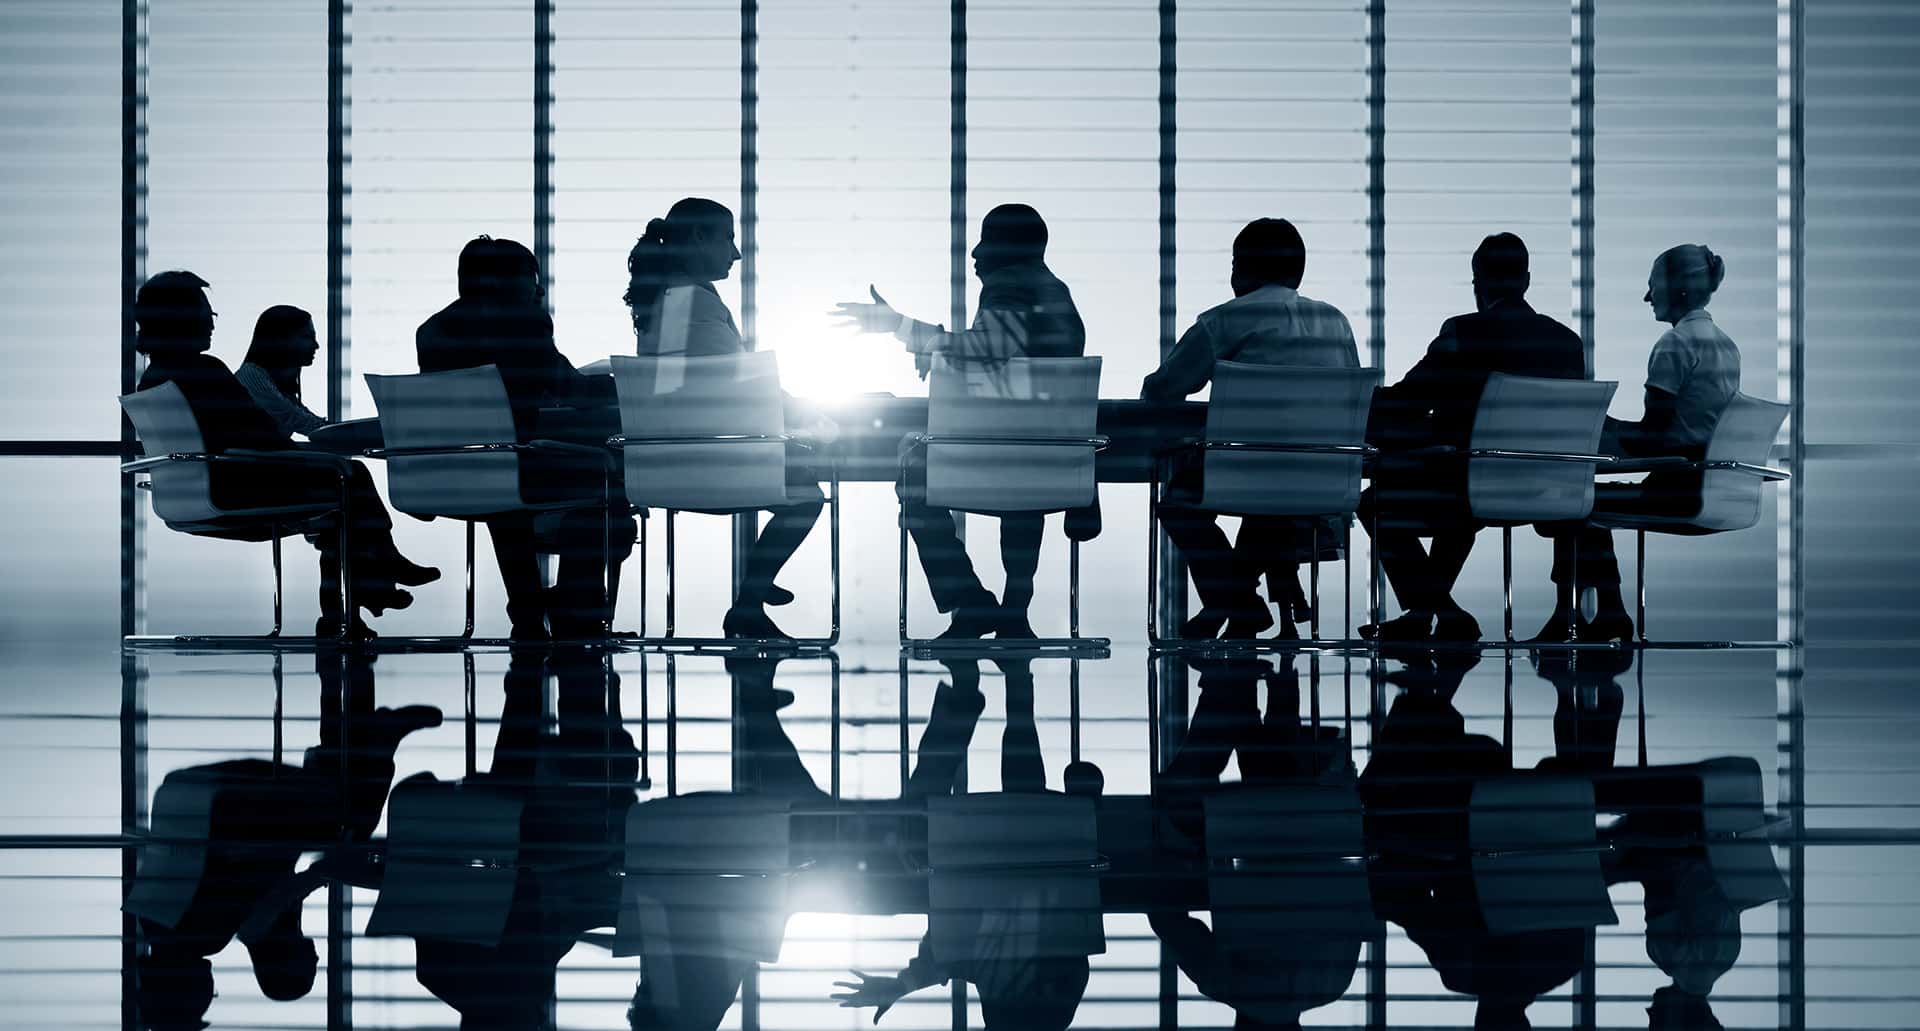 Silhouetted figures sit around a boardroom table in discussion. The room is illuminated by light streaming in through large, vertical blinds, creating reflections on the shiny floor. The scene evokes a formal, professional meeting atmosphere.